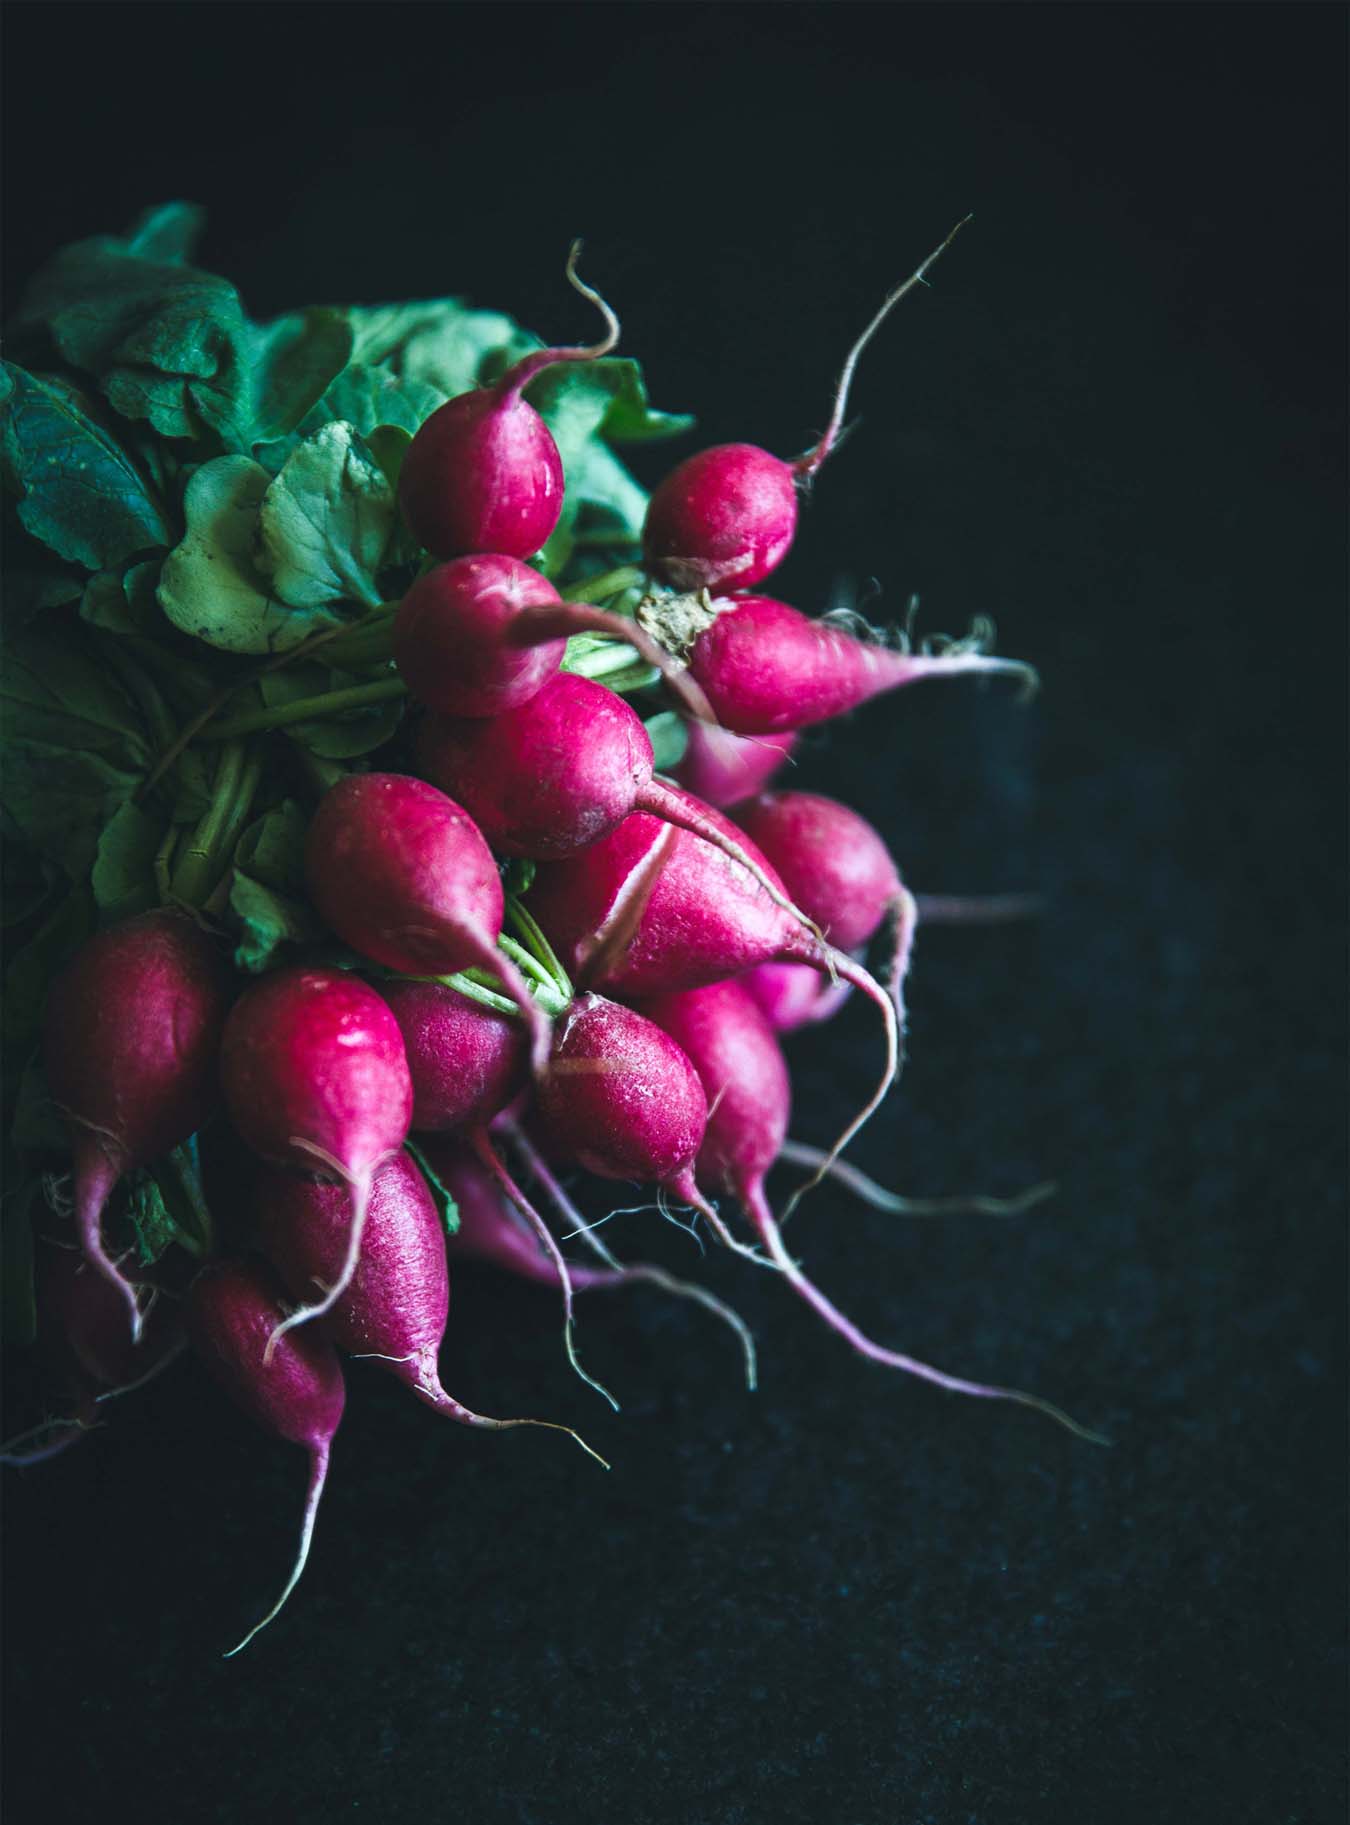 Bunch of radishes on a dark plate atmospheric photograped